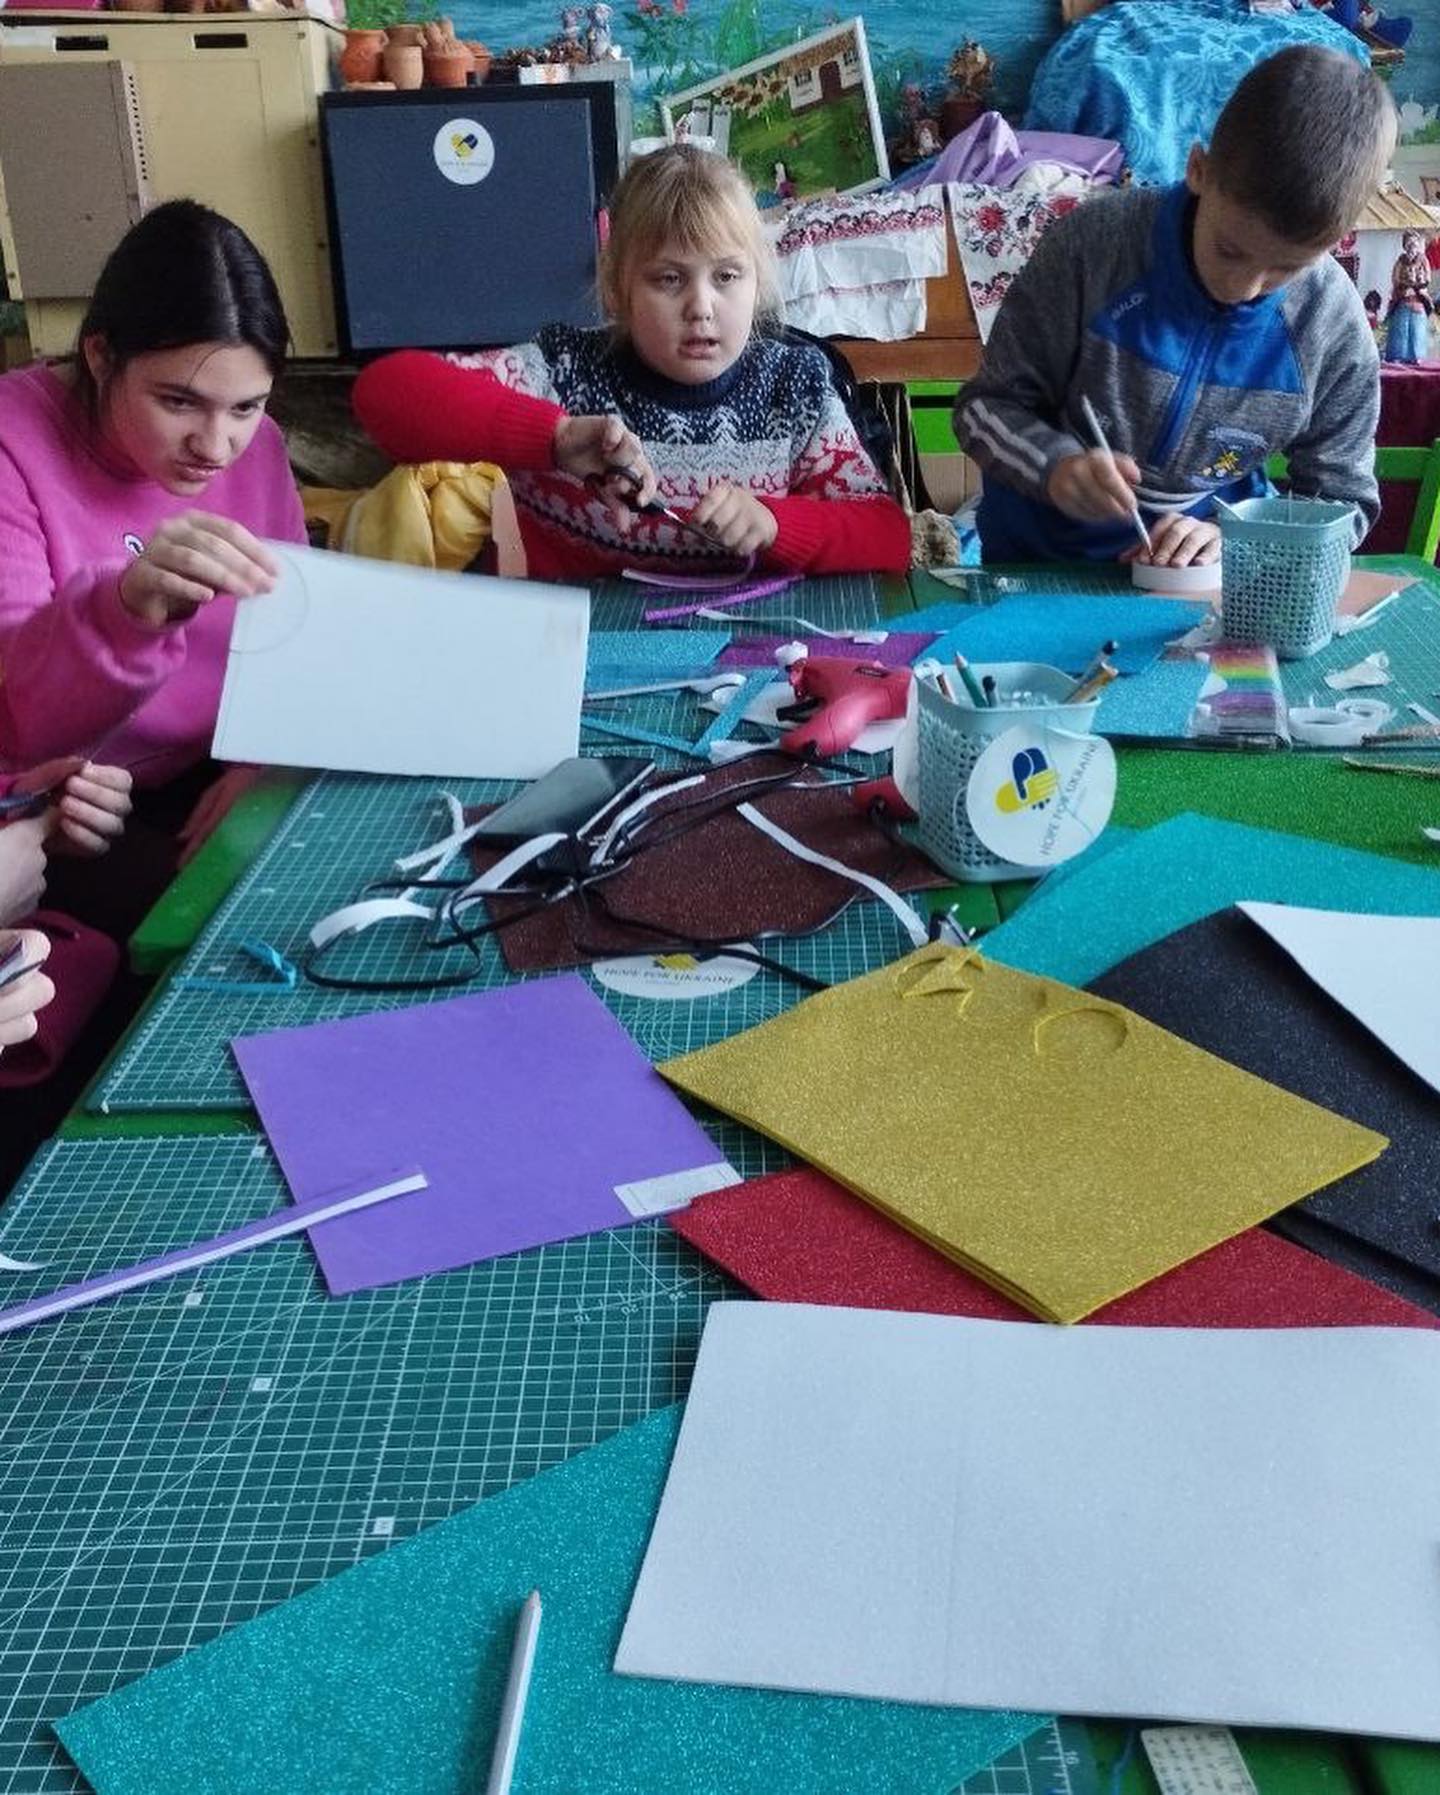 A group of children are making crafts at a table.